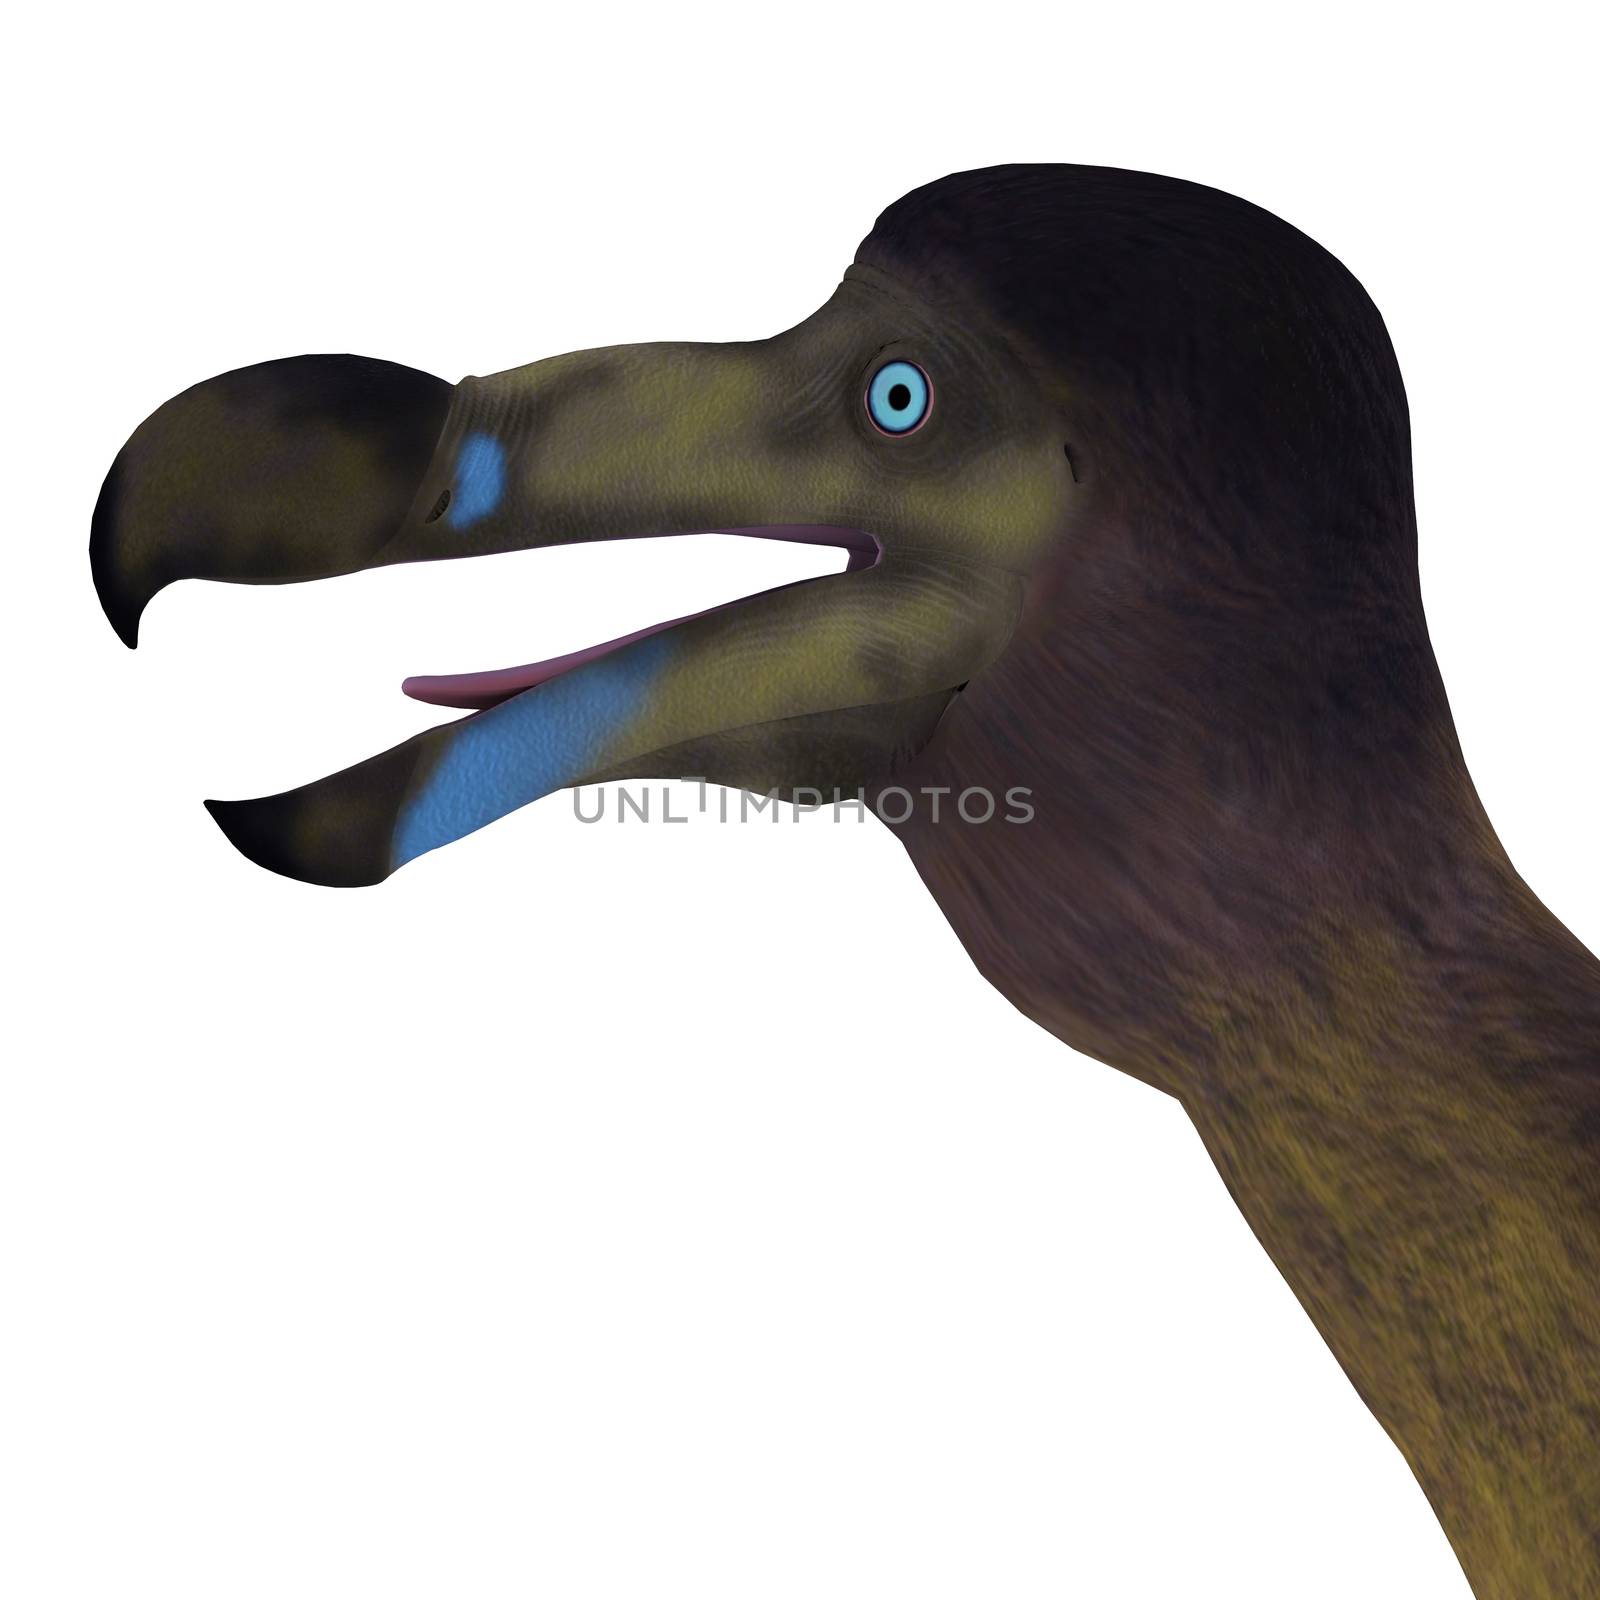 The Dodo is an extinct flightless bird that lived on Mauritius Island in the Indian Ocean.